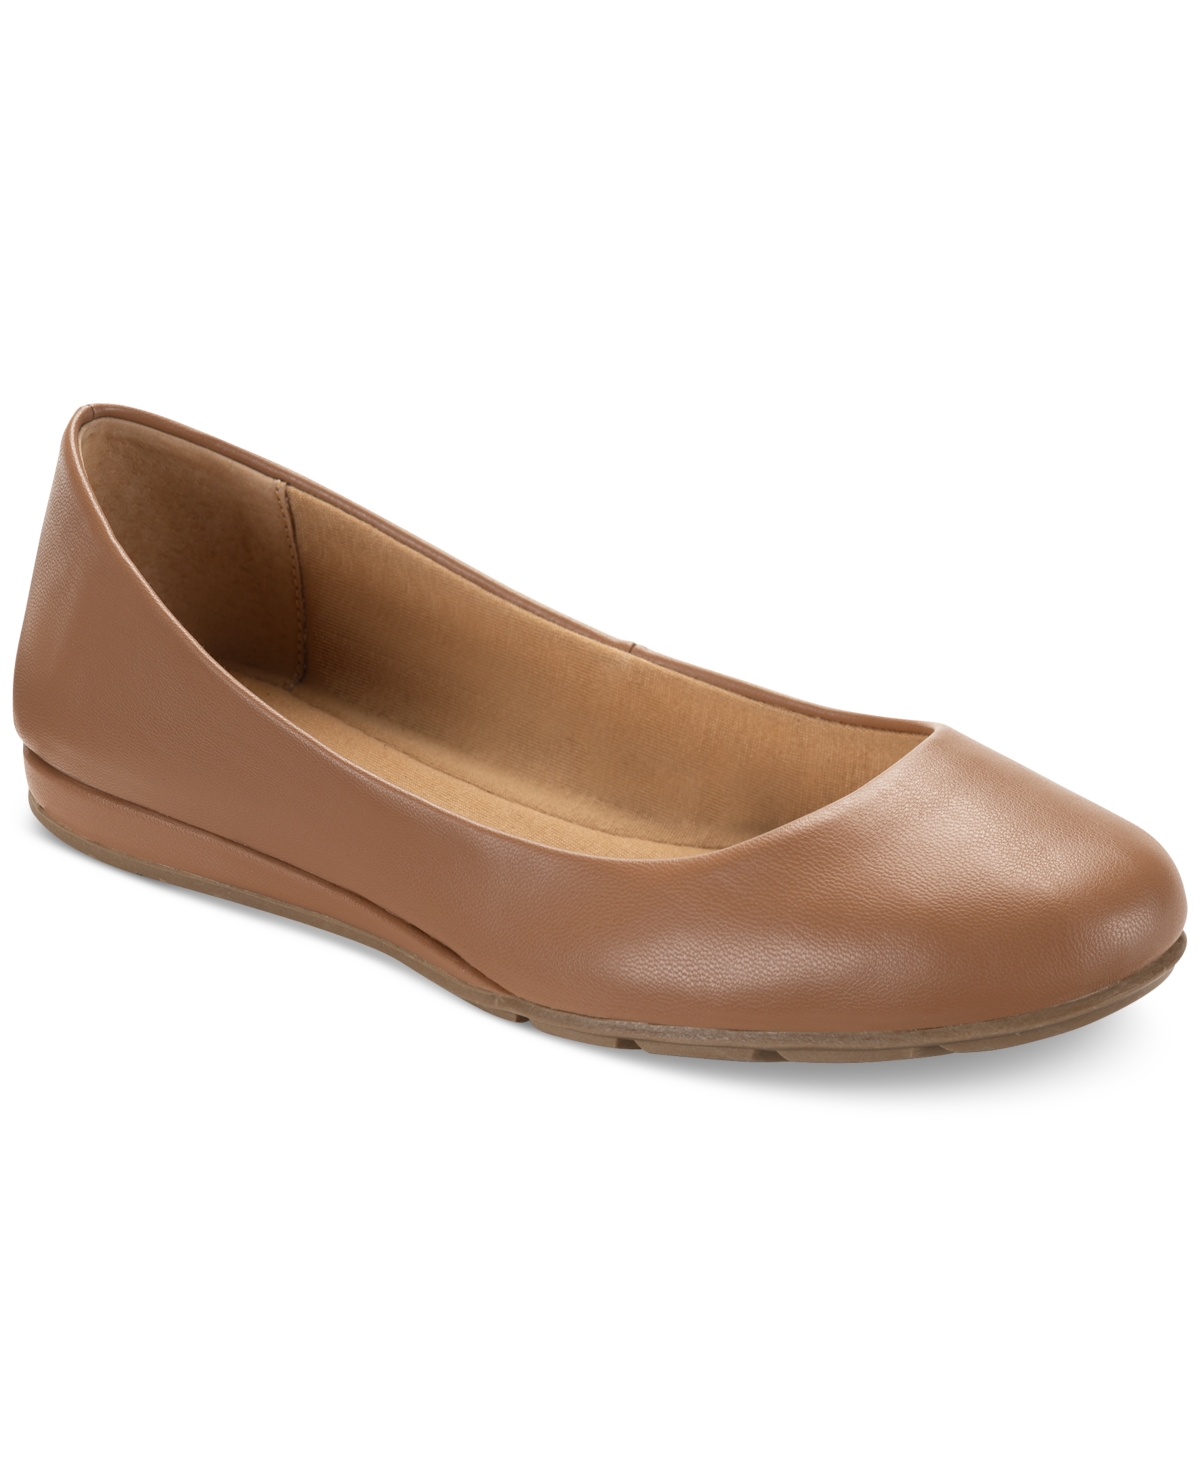 Women's Eliana Ballet Flats, Created for Macy's - Taupe